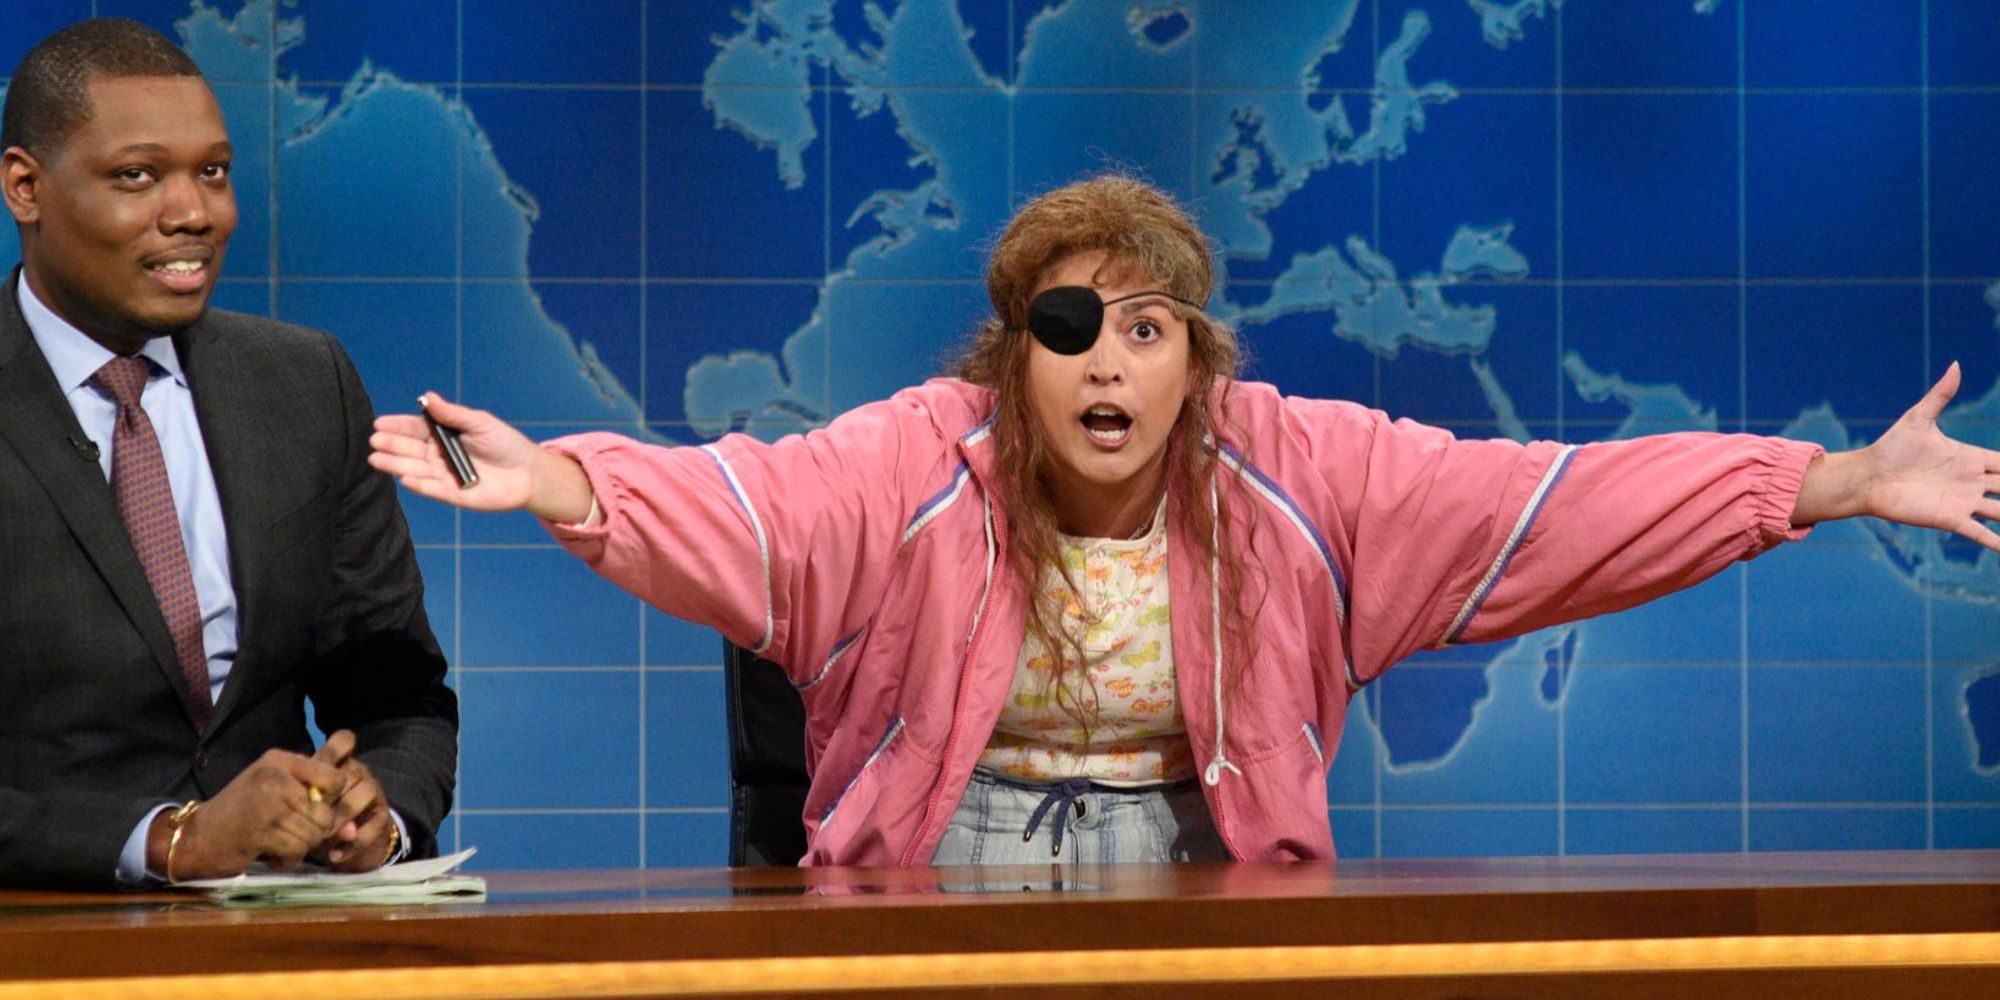 20 Best 'Saturday Night Live' Political Sketches – Rolling Stone